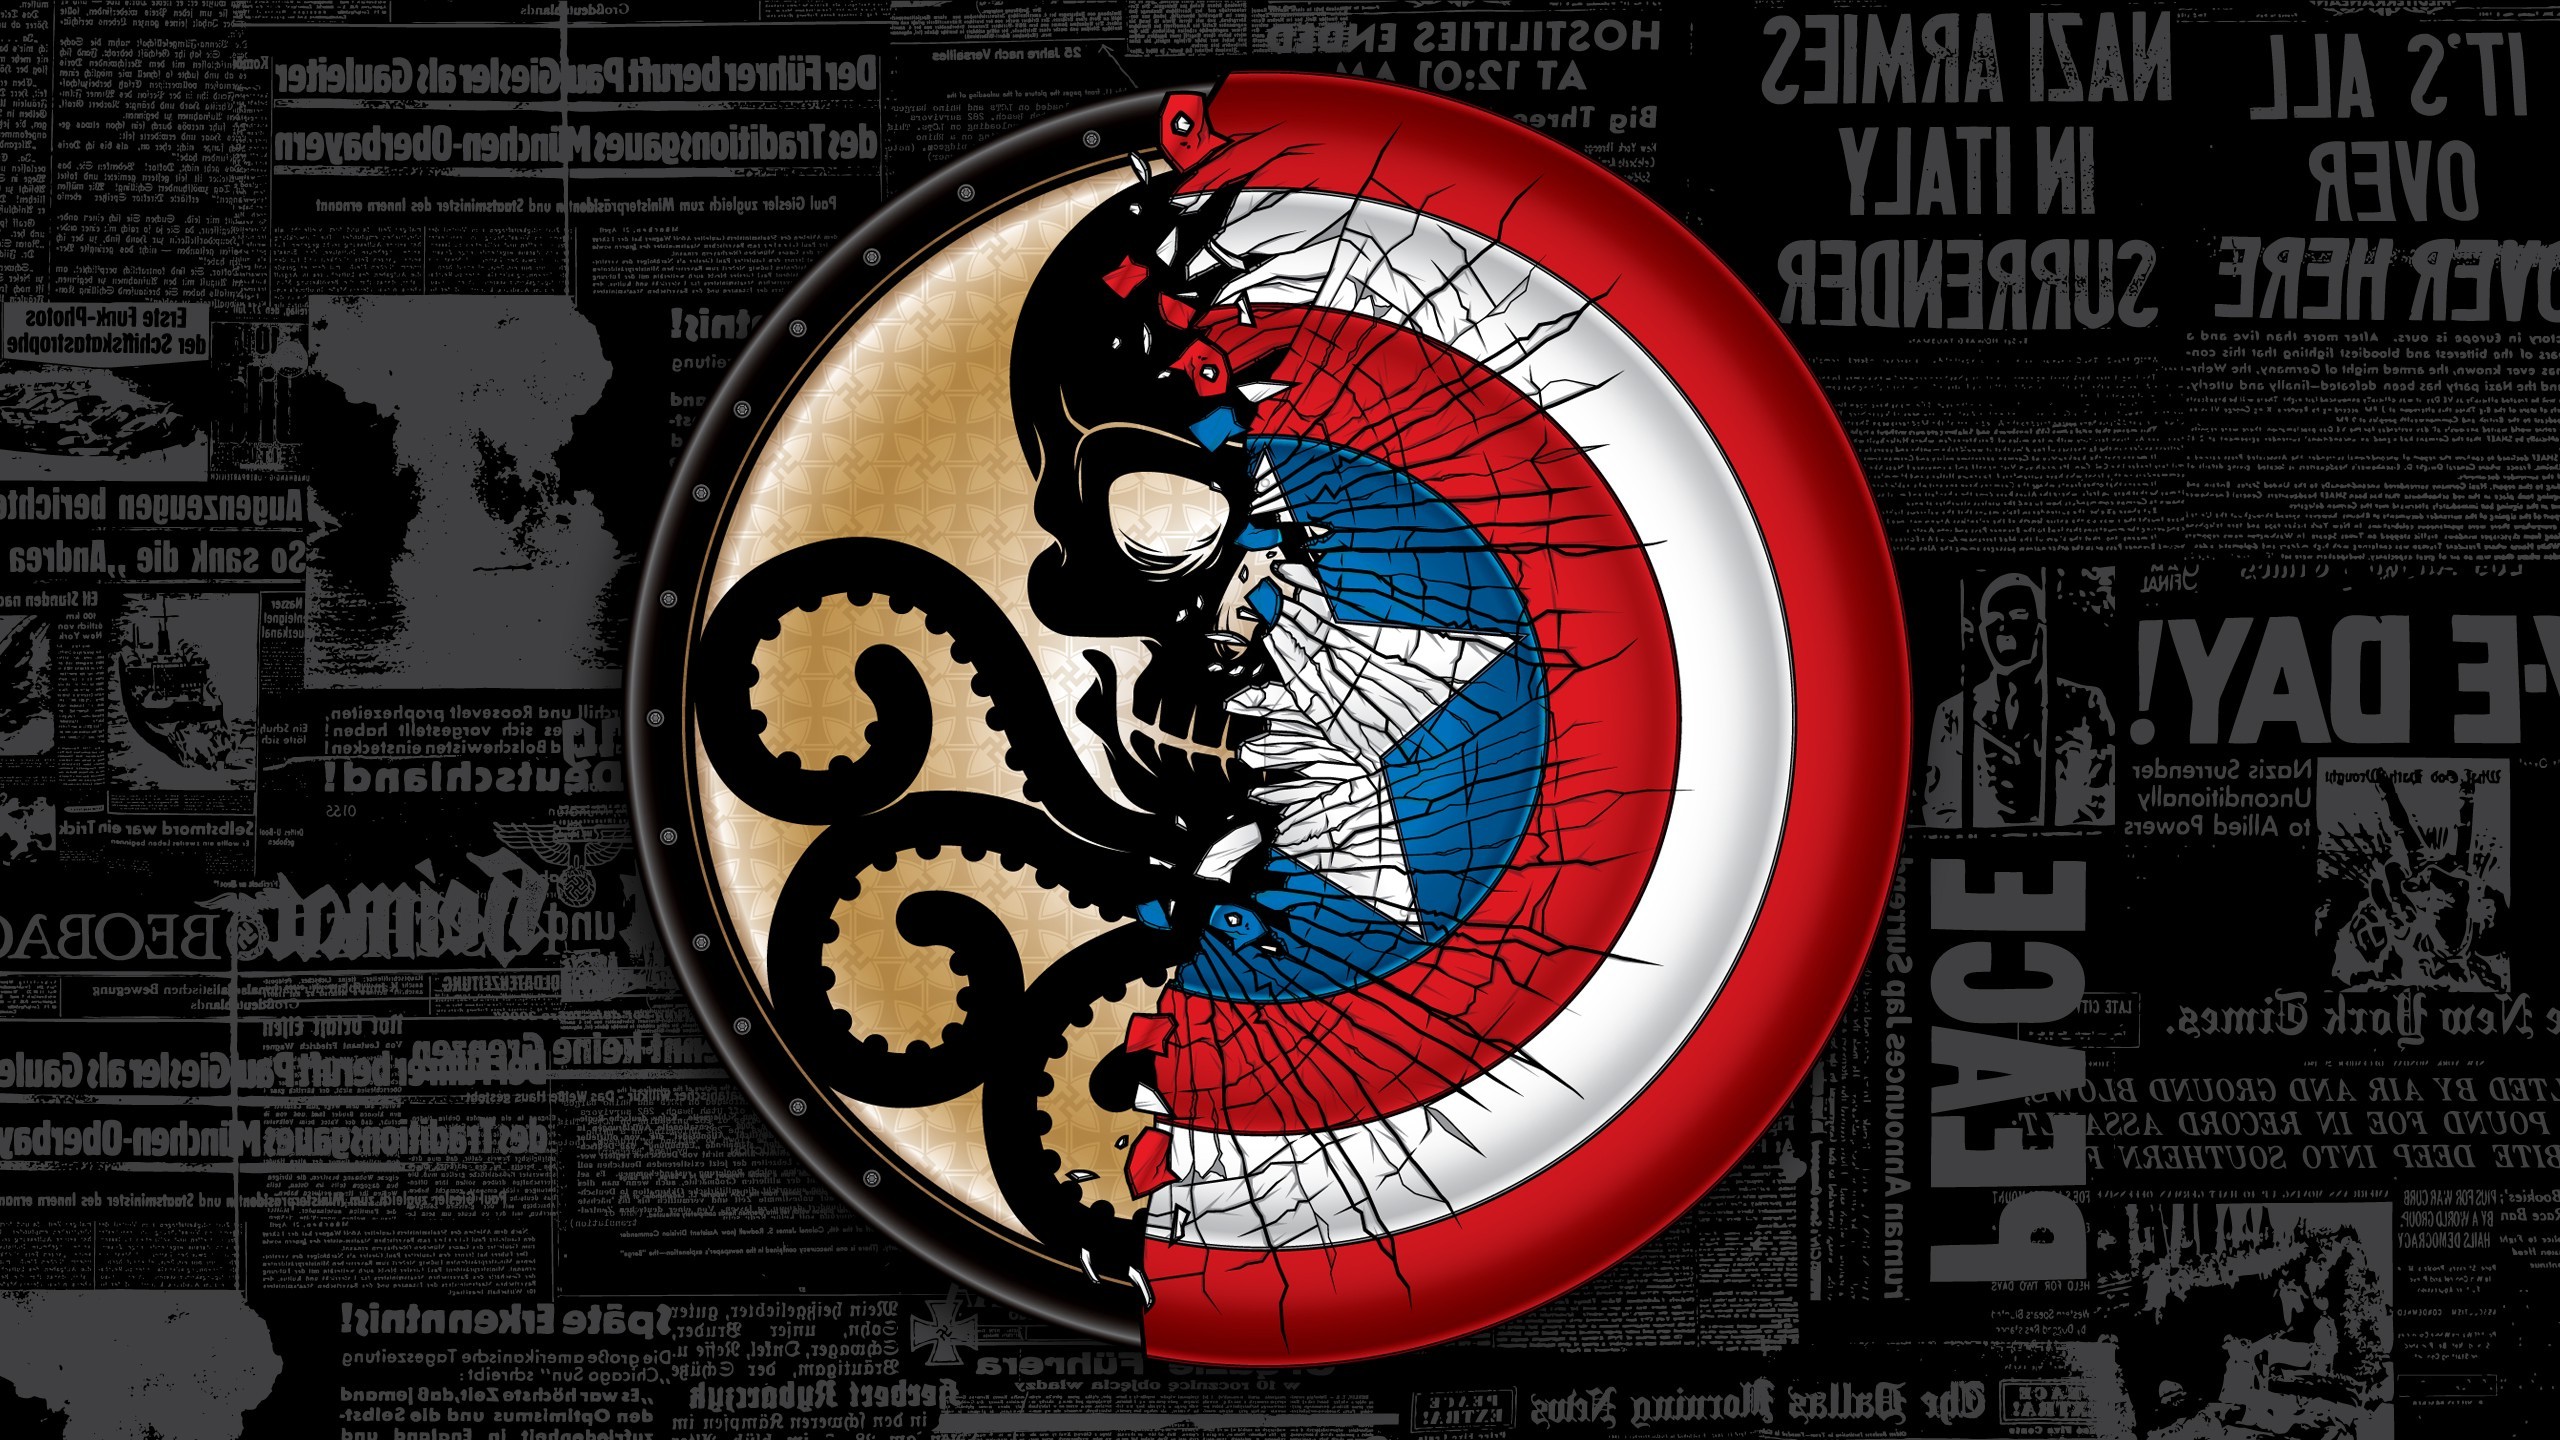 The Avengers, Captain America: The Winter Soldier, Typography, World War II, Newspapers, Cracked, Shields, Hydra (comics) Wallpaper